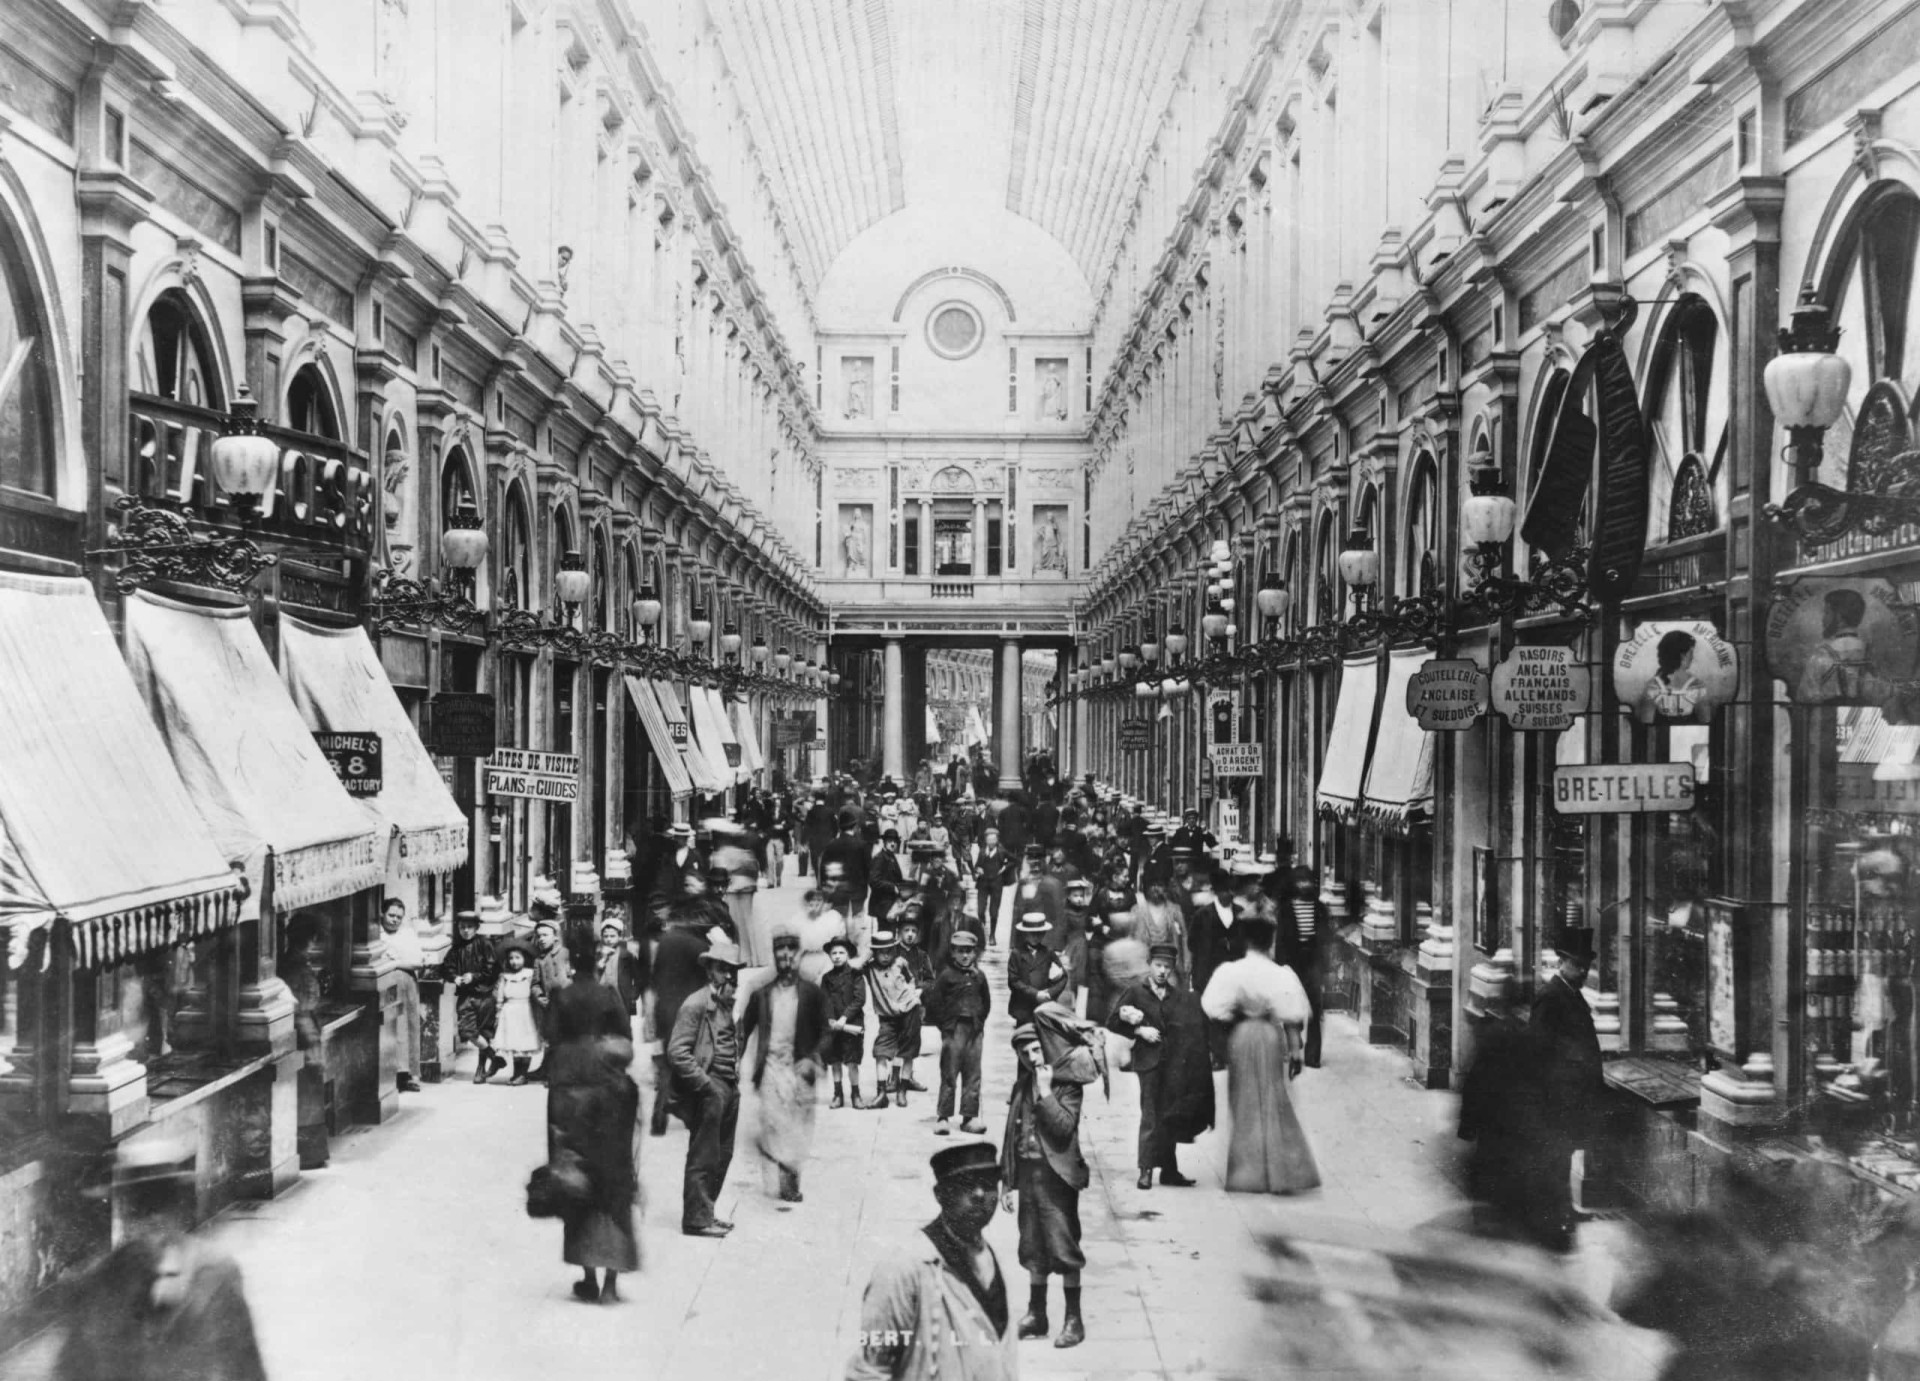 A view of the sublime Galeries Royales Saint-Hubert, a series of glazed shopping arcades, taken around 1890.<p>You may also like:<a href="https://www.starsinsider.com/n/463073?utm_source=msn.com&utm_medium=display&utm_campaign=referral_description&utm_content=397441v1en-us"> The funniest, dumbest ways criminals got themselves caught</a></p>